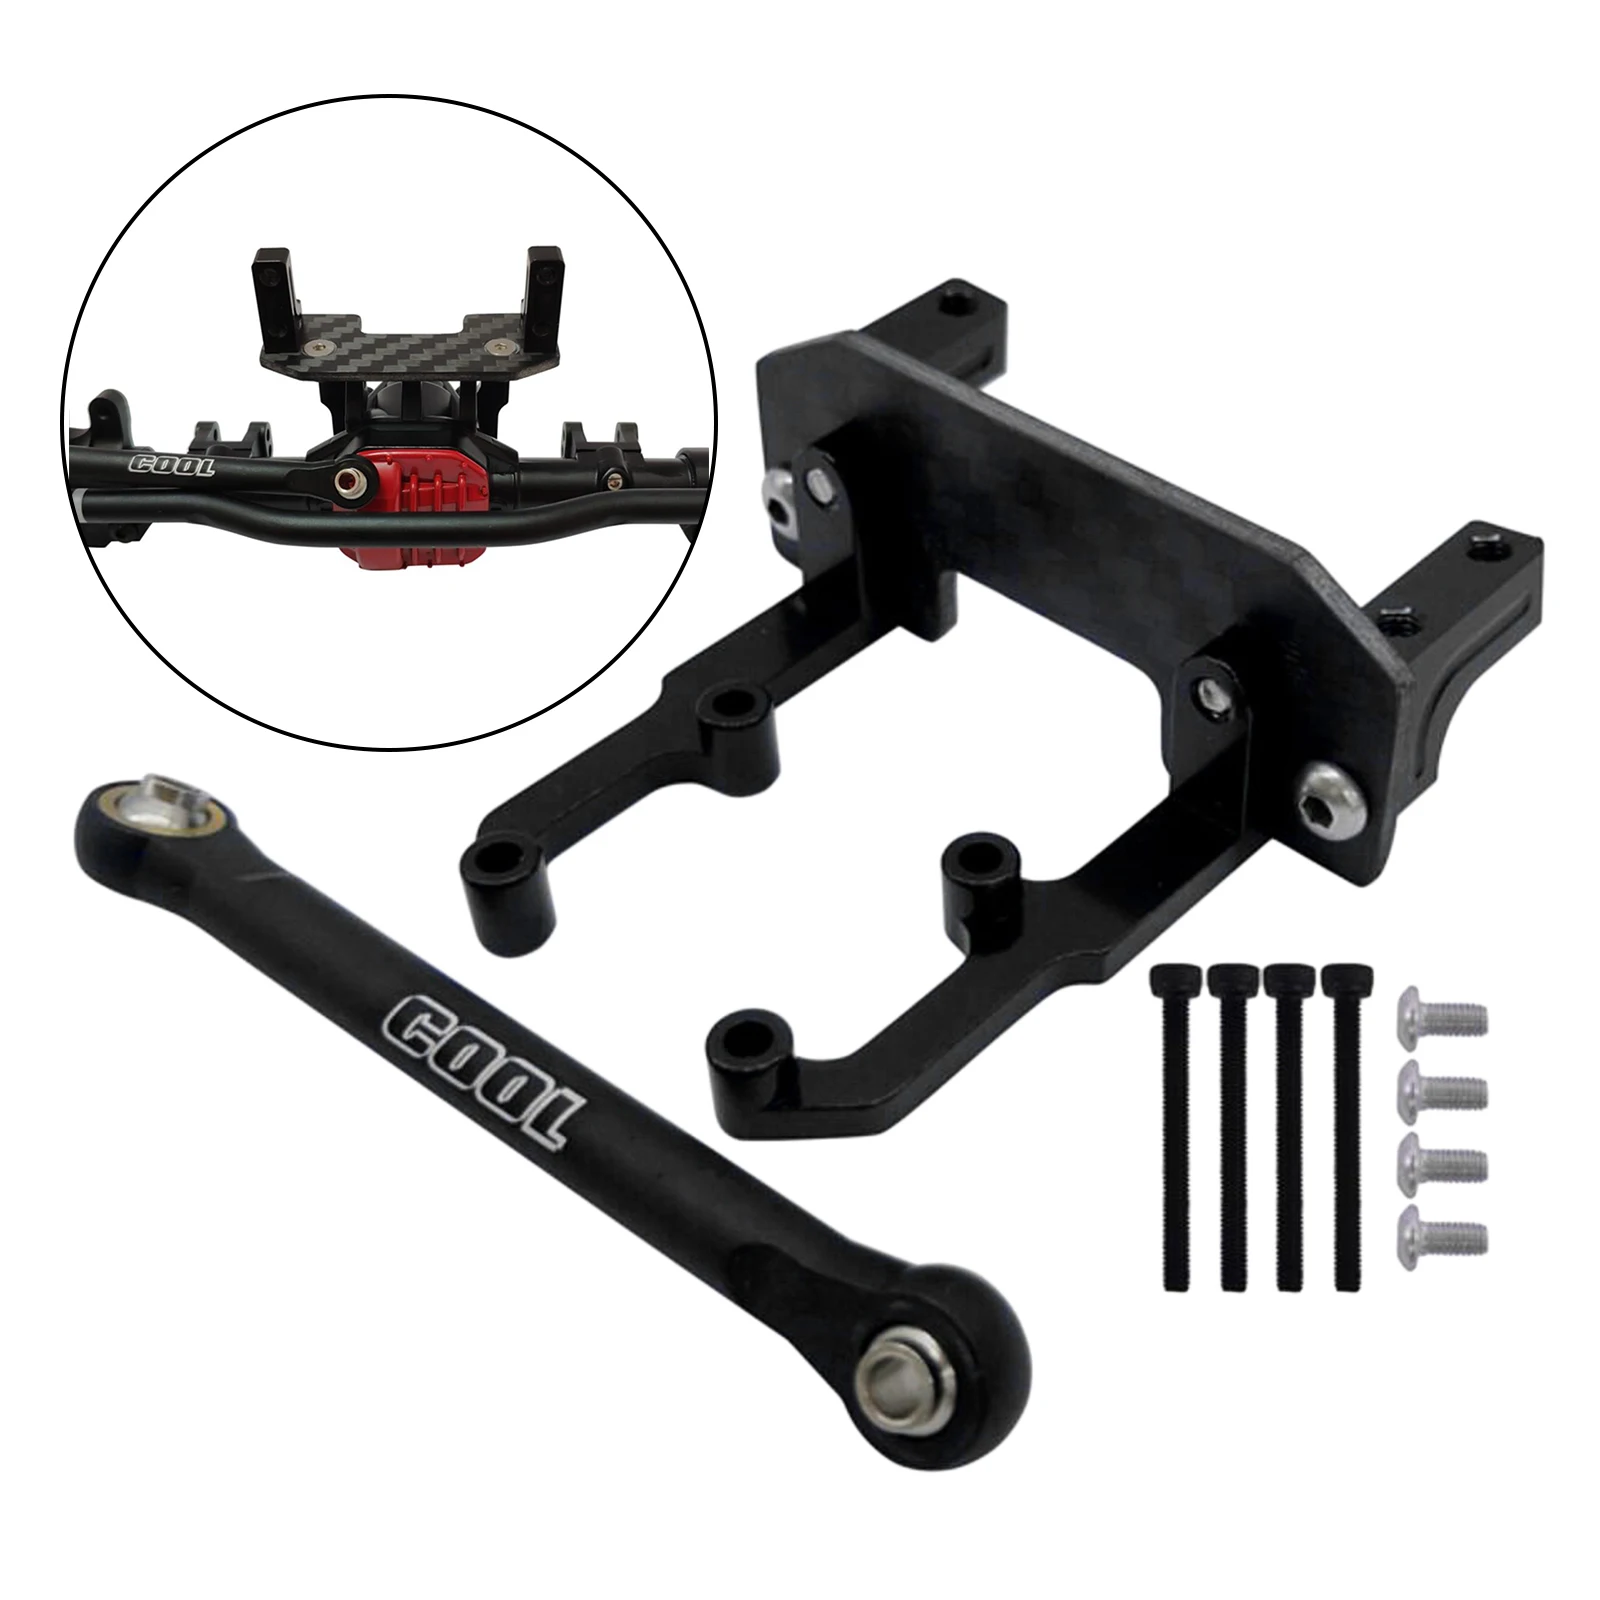 Metal Carbon Fiber Bottom Plate Servo Bracket Mount Stand For 1/10 RC Crawler Car for Axial SCX10 II 90046 90047 Axle Ar44 Part